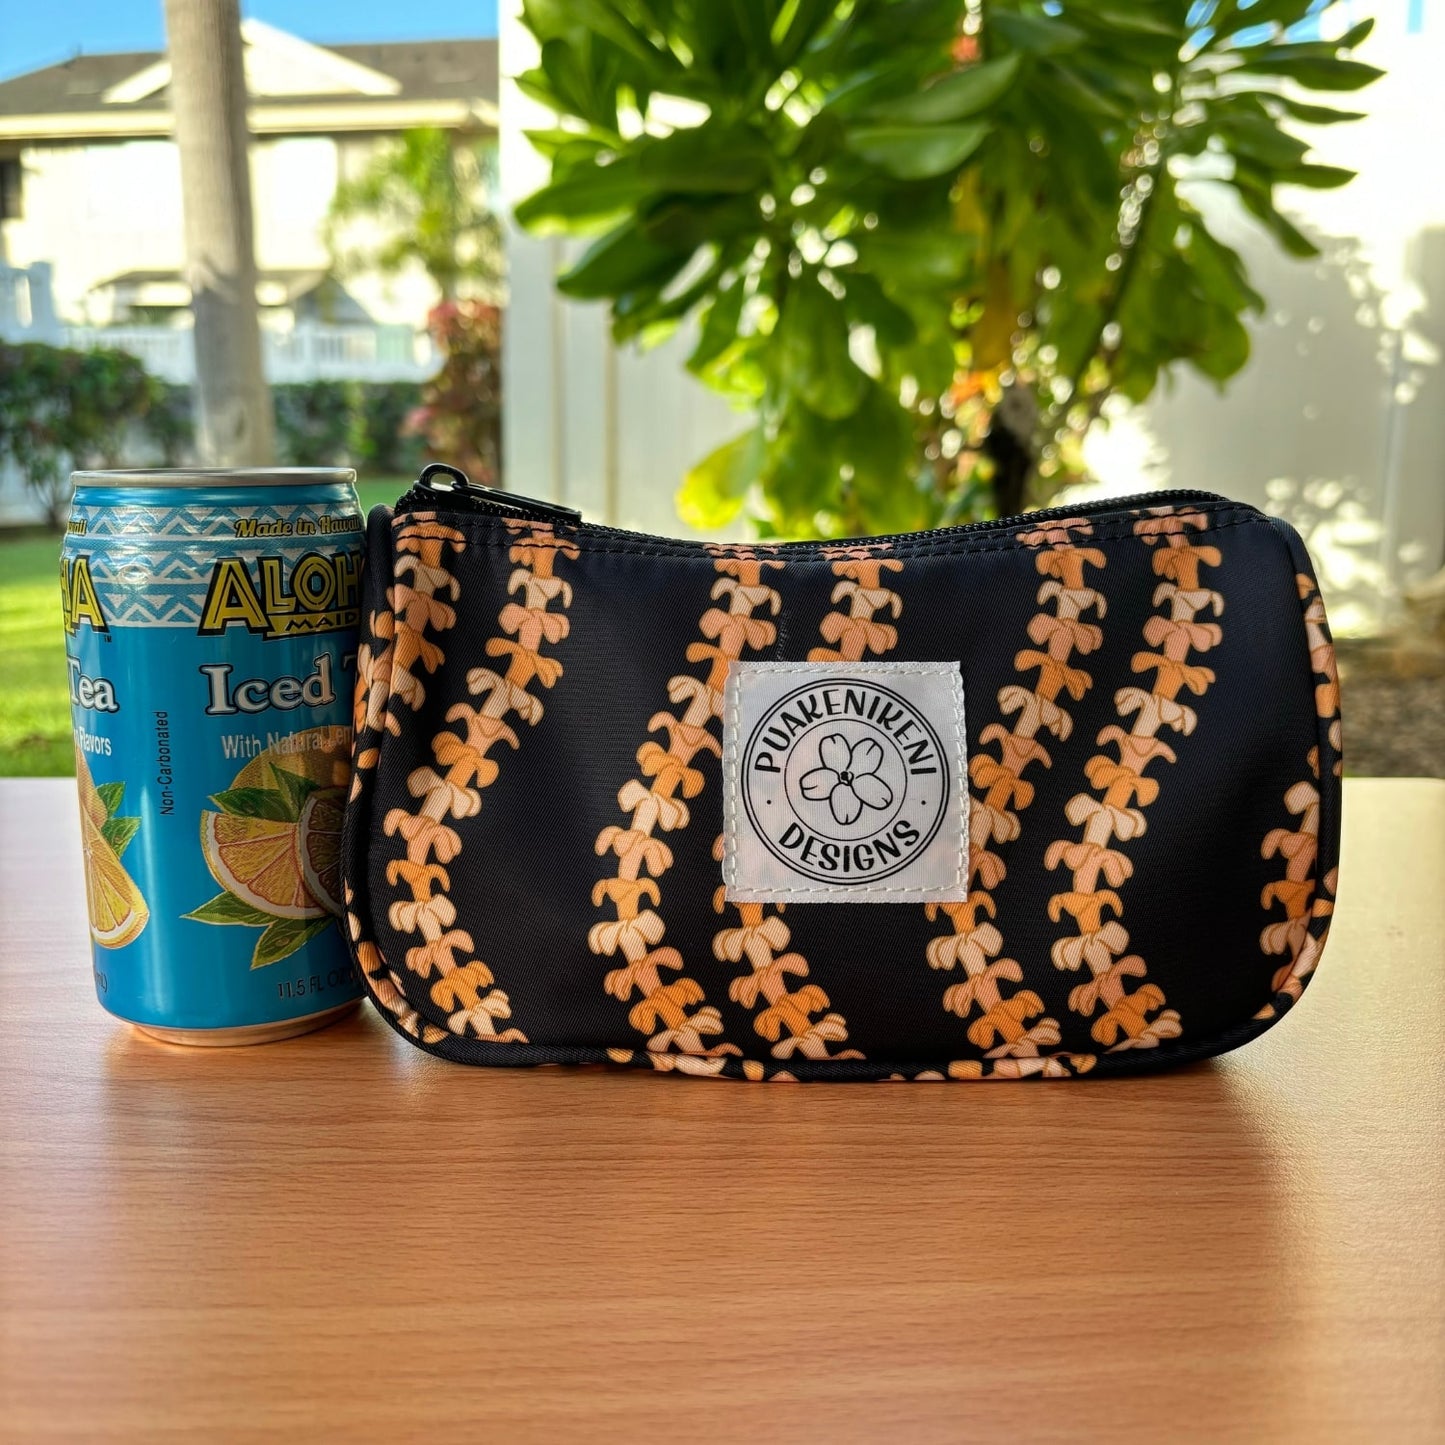 grab and go set includes mini zipper pouch and wristlet key fob in kaulua black orange lei - from Puakenikeni Designs - mini zipper pouch next to juice can to show size comparison